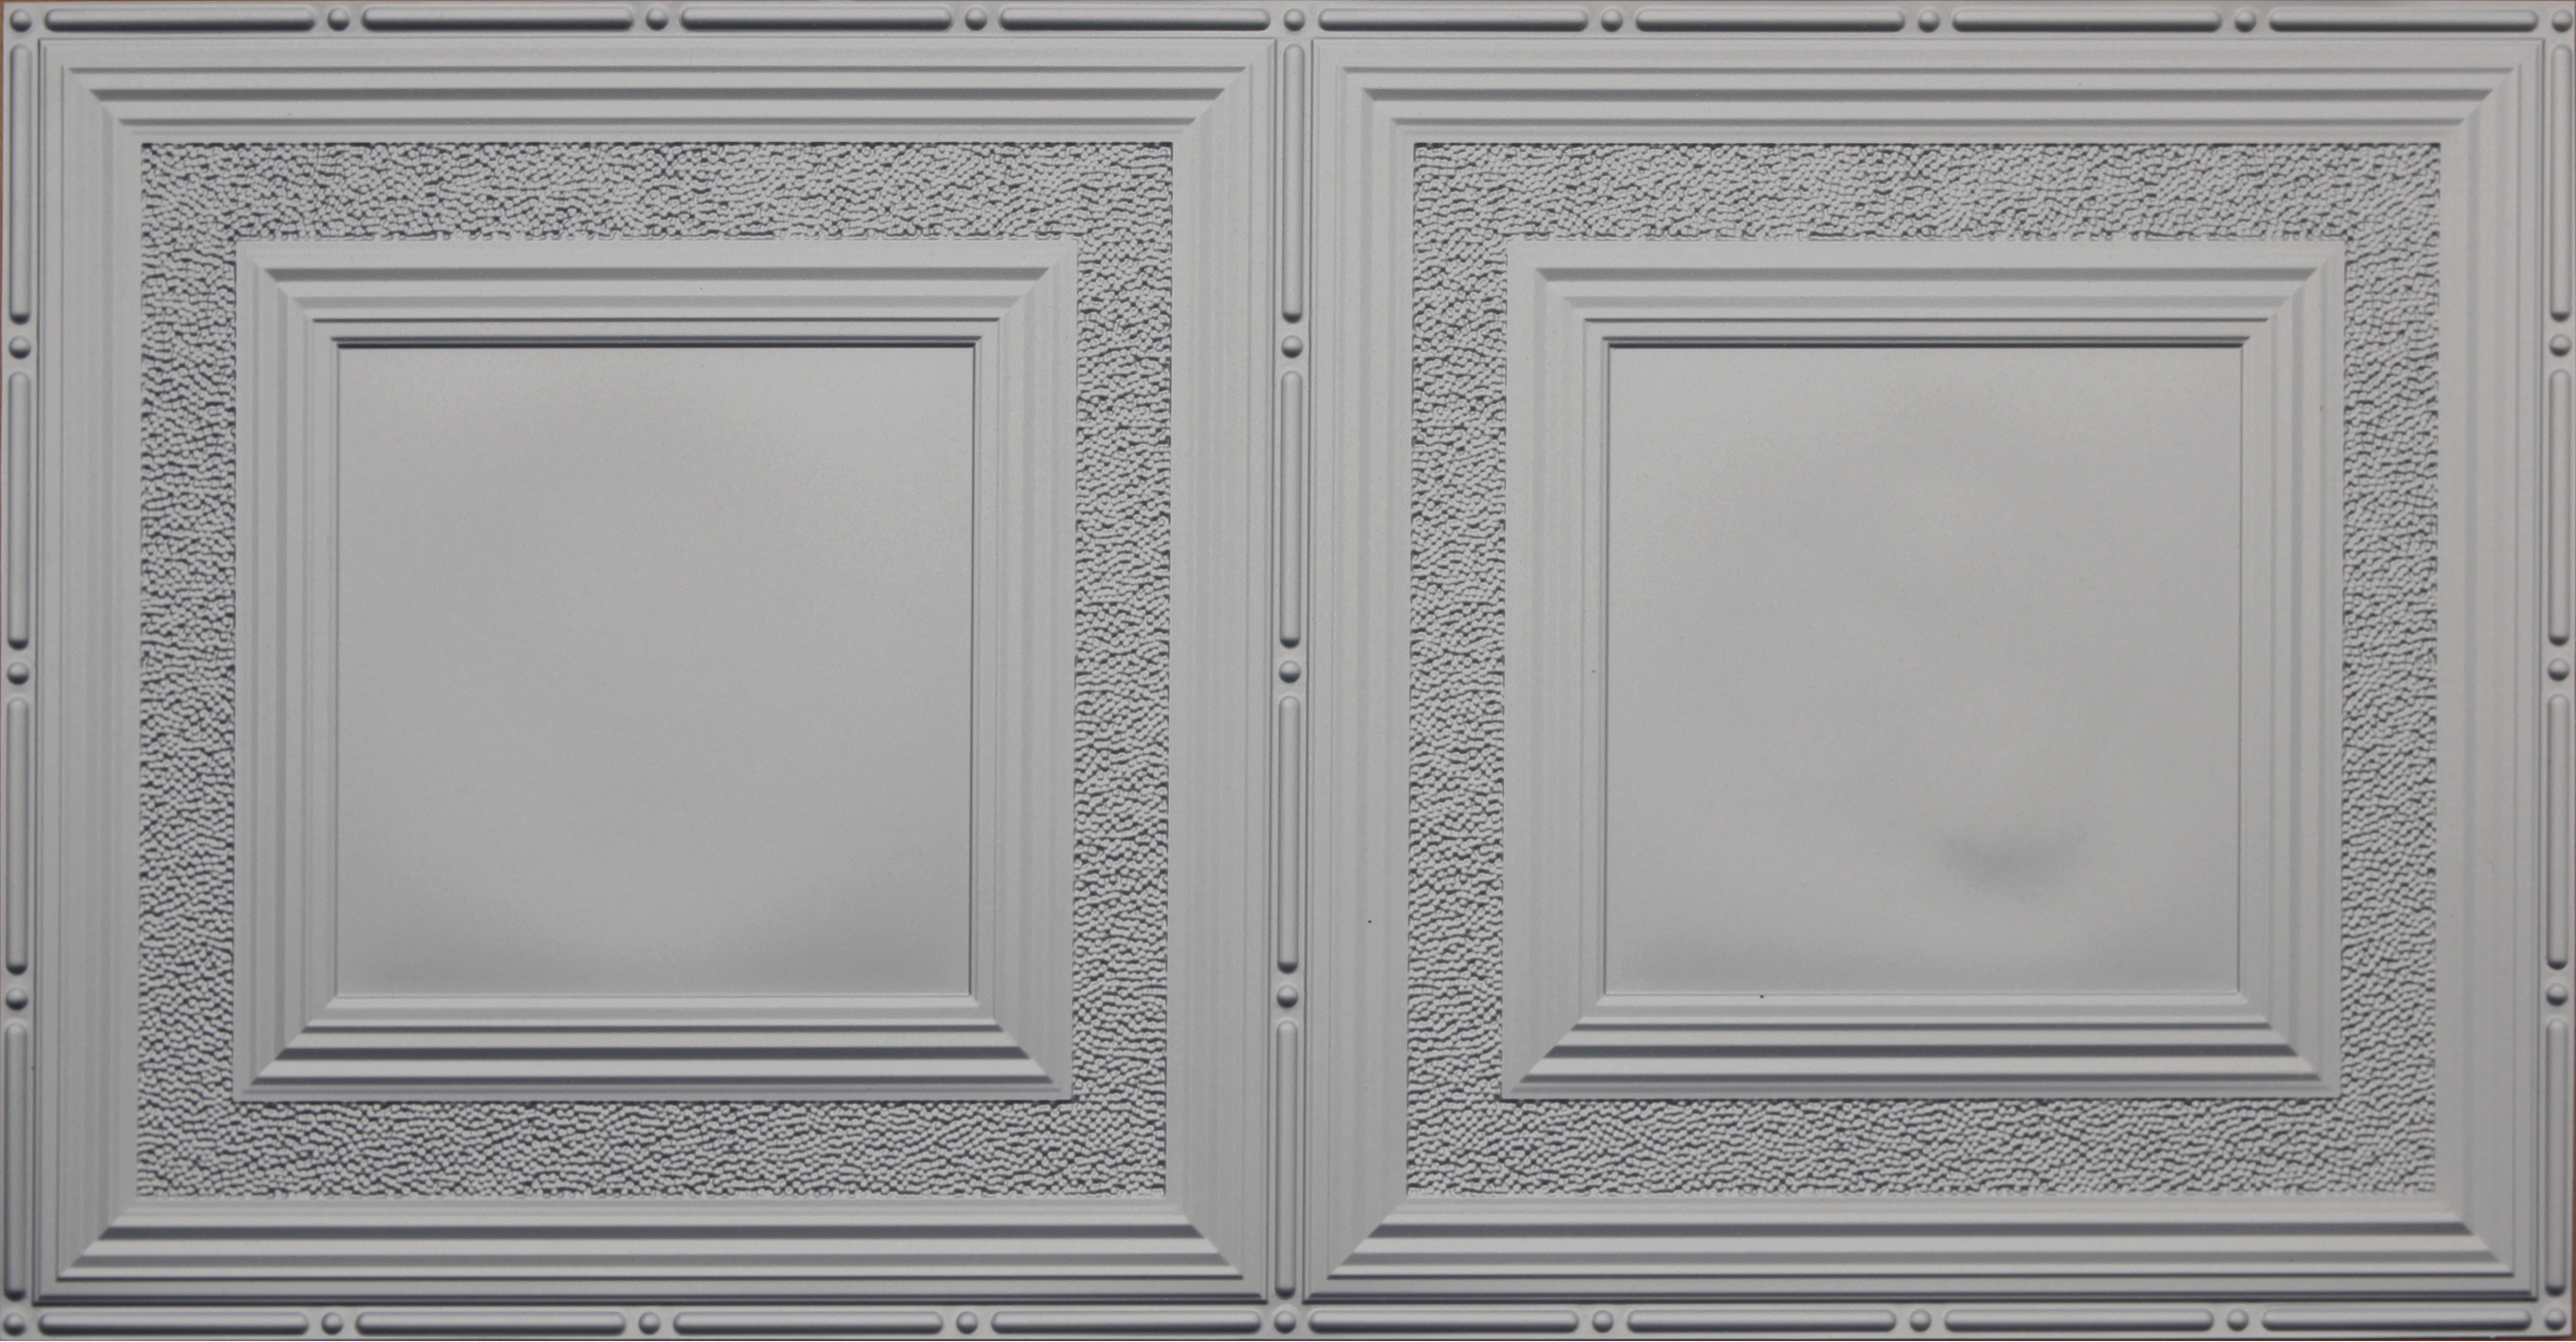 Permalink to New Tin Ceiling Tiles